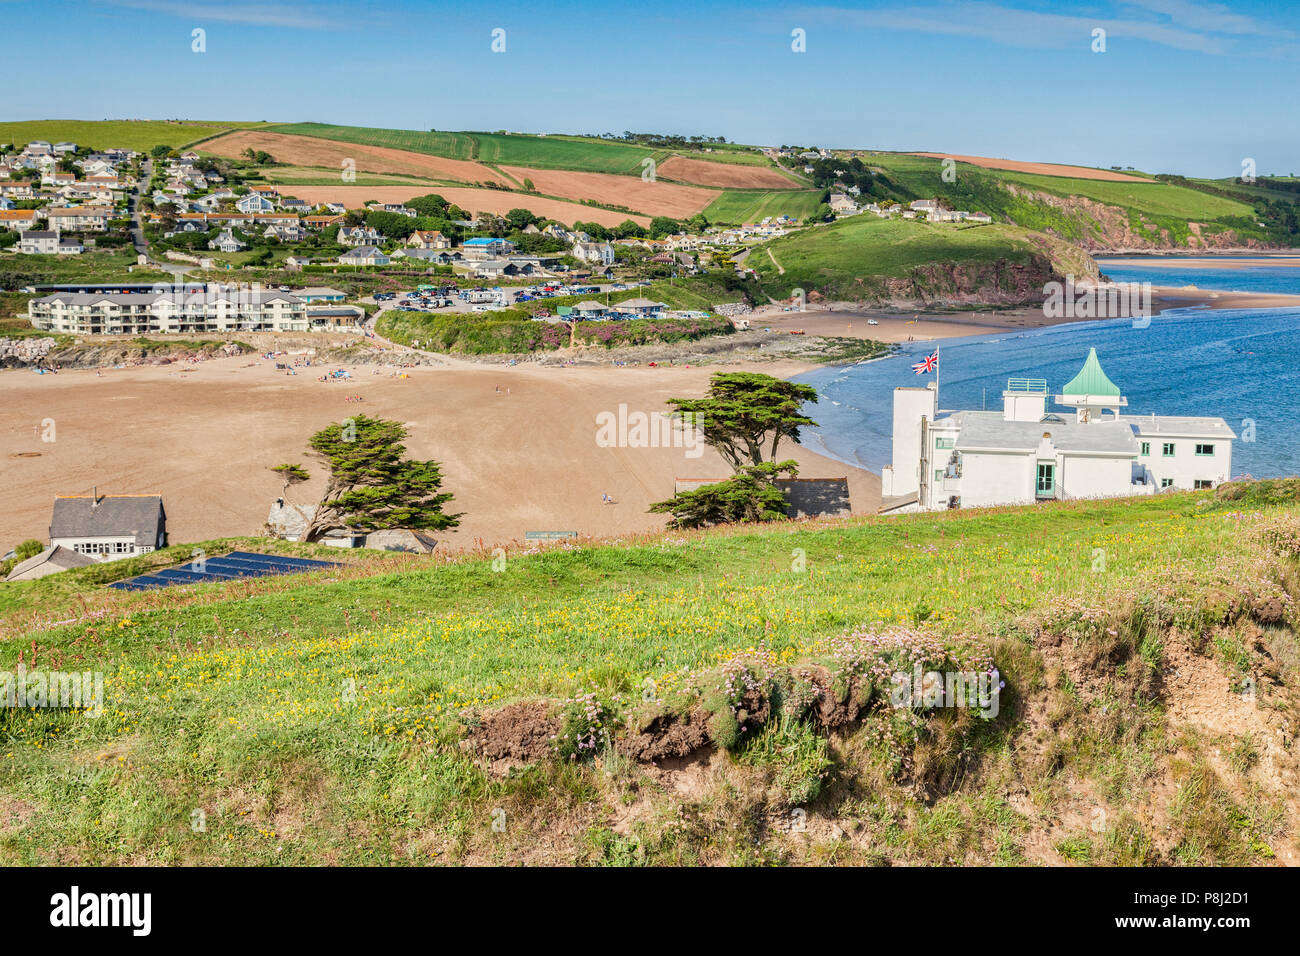 3 June 2018: Bigbury on Sea, Devon, UK - A view across to Bigbury from Burgh Island at low tide. The Burgh Island Hotel is on the right. Stock Photo